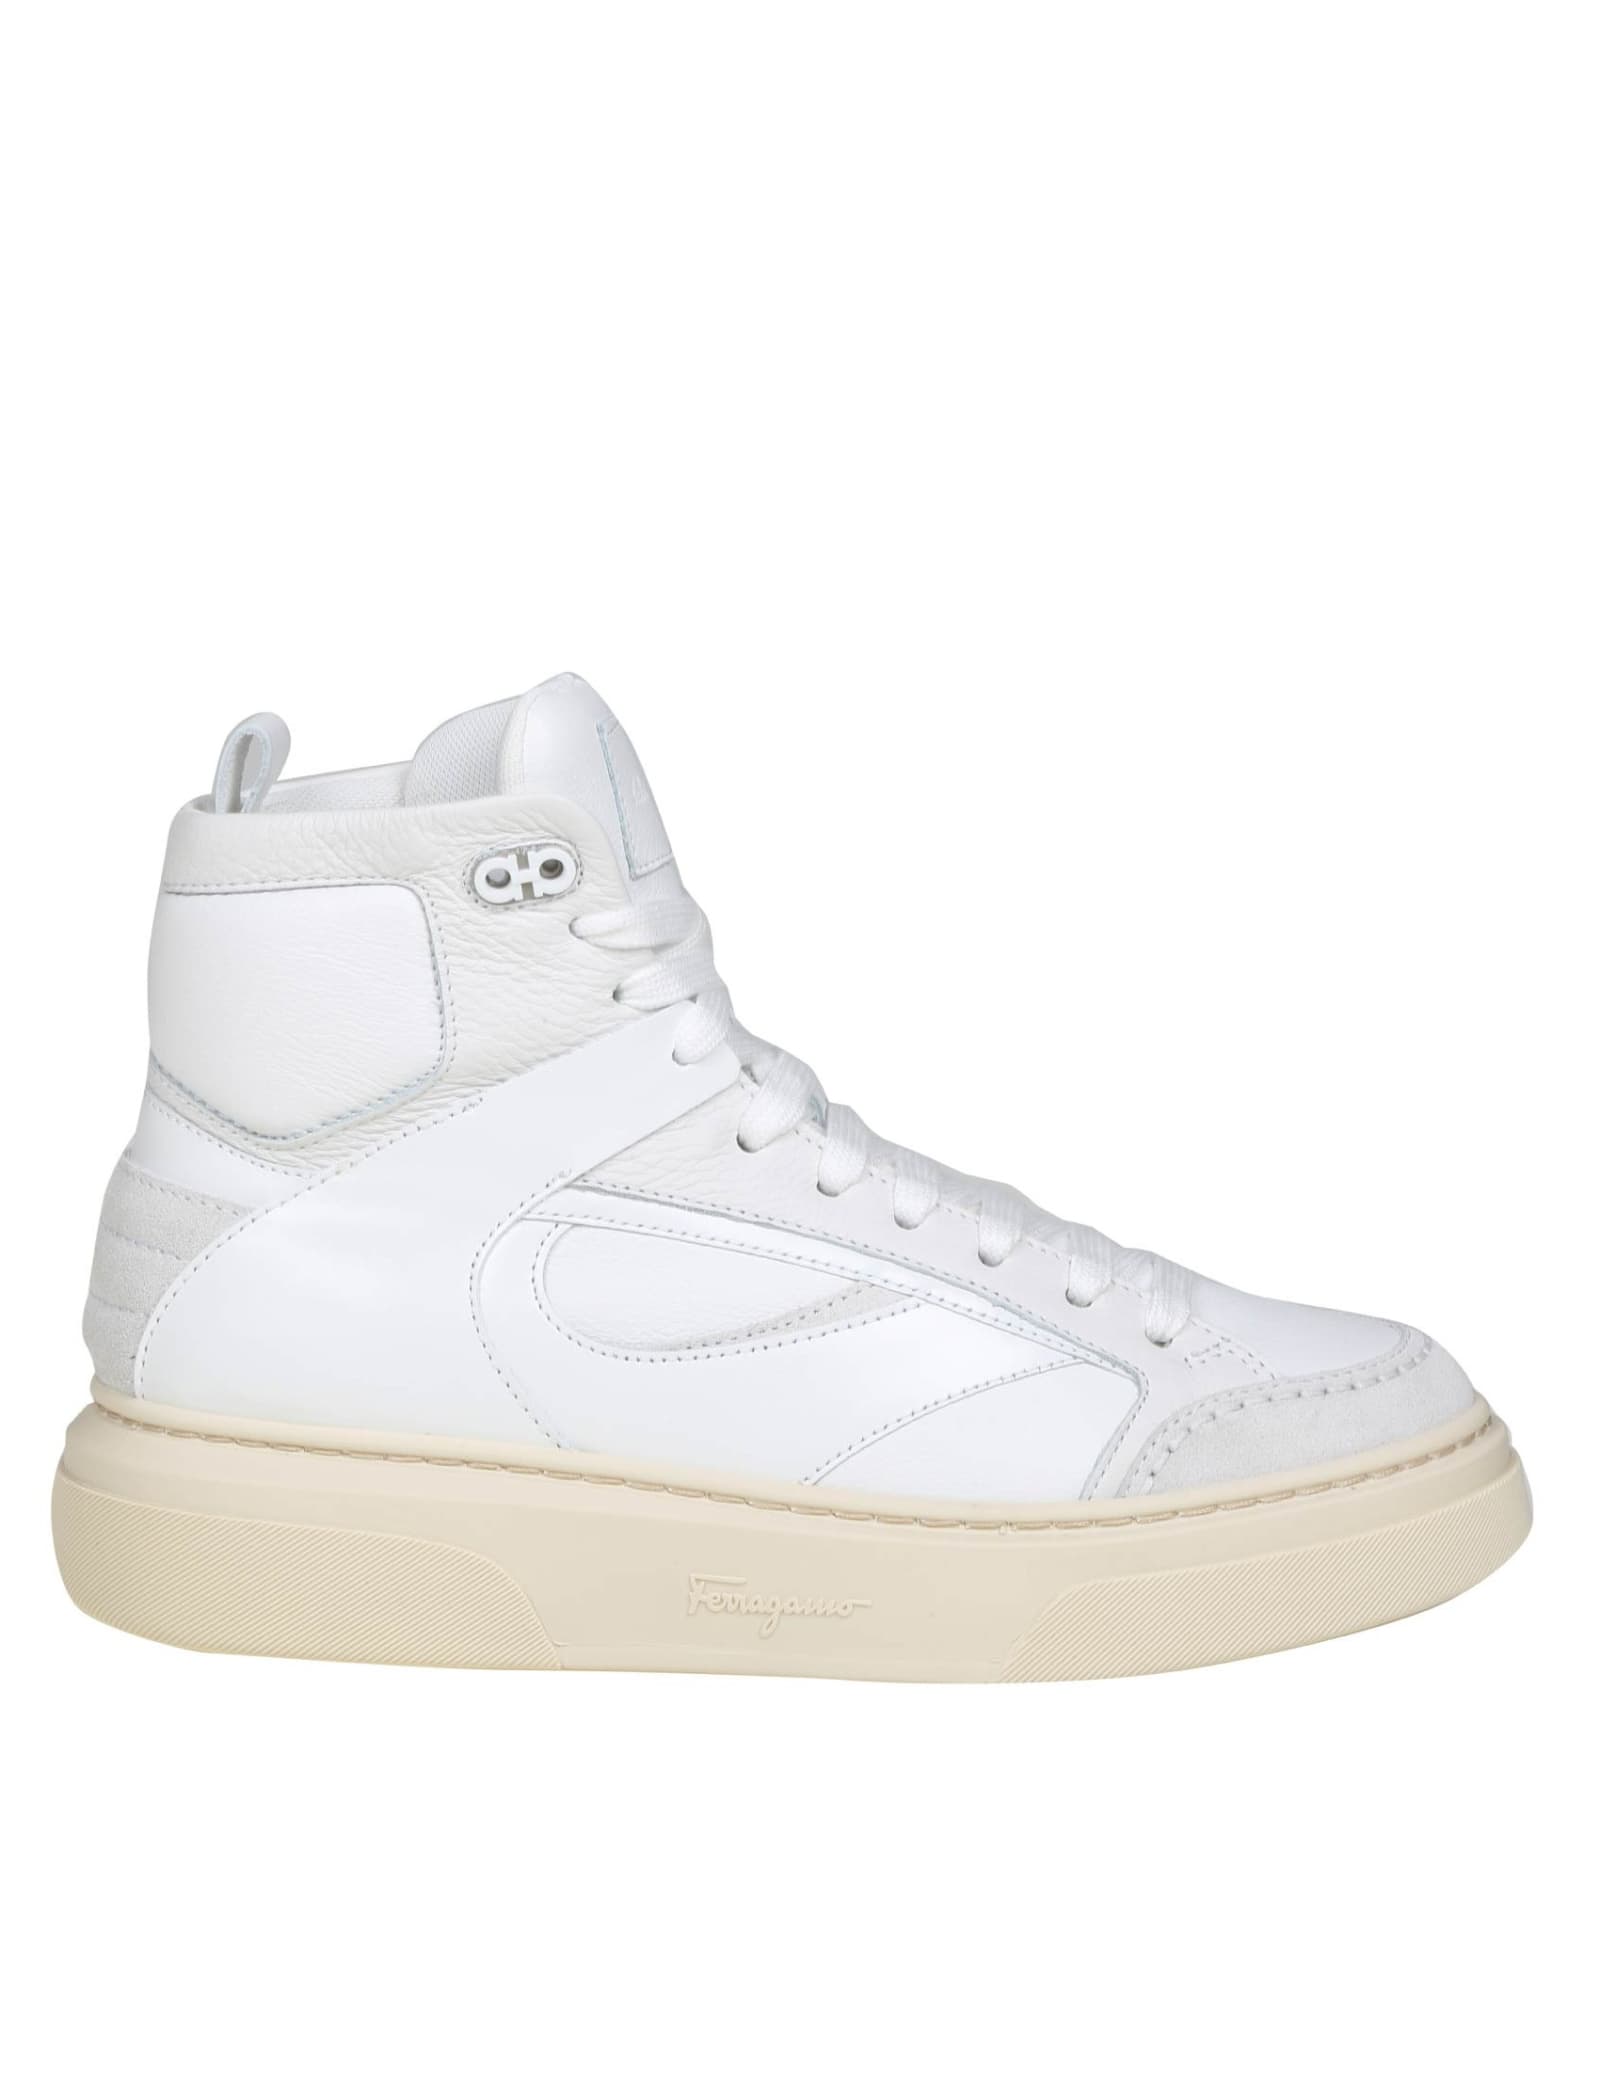 FERRAGAMO HIGH CASSIO SNEAKERS IN LEATHER AND SUEDE